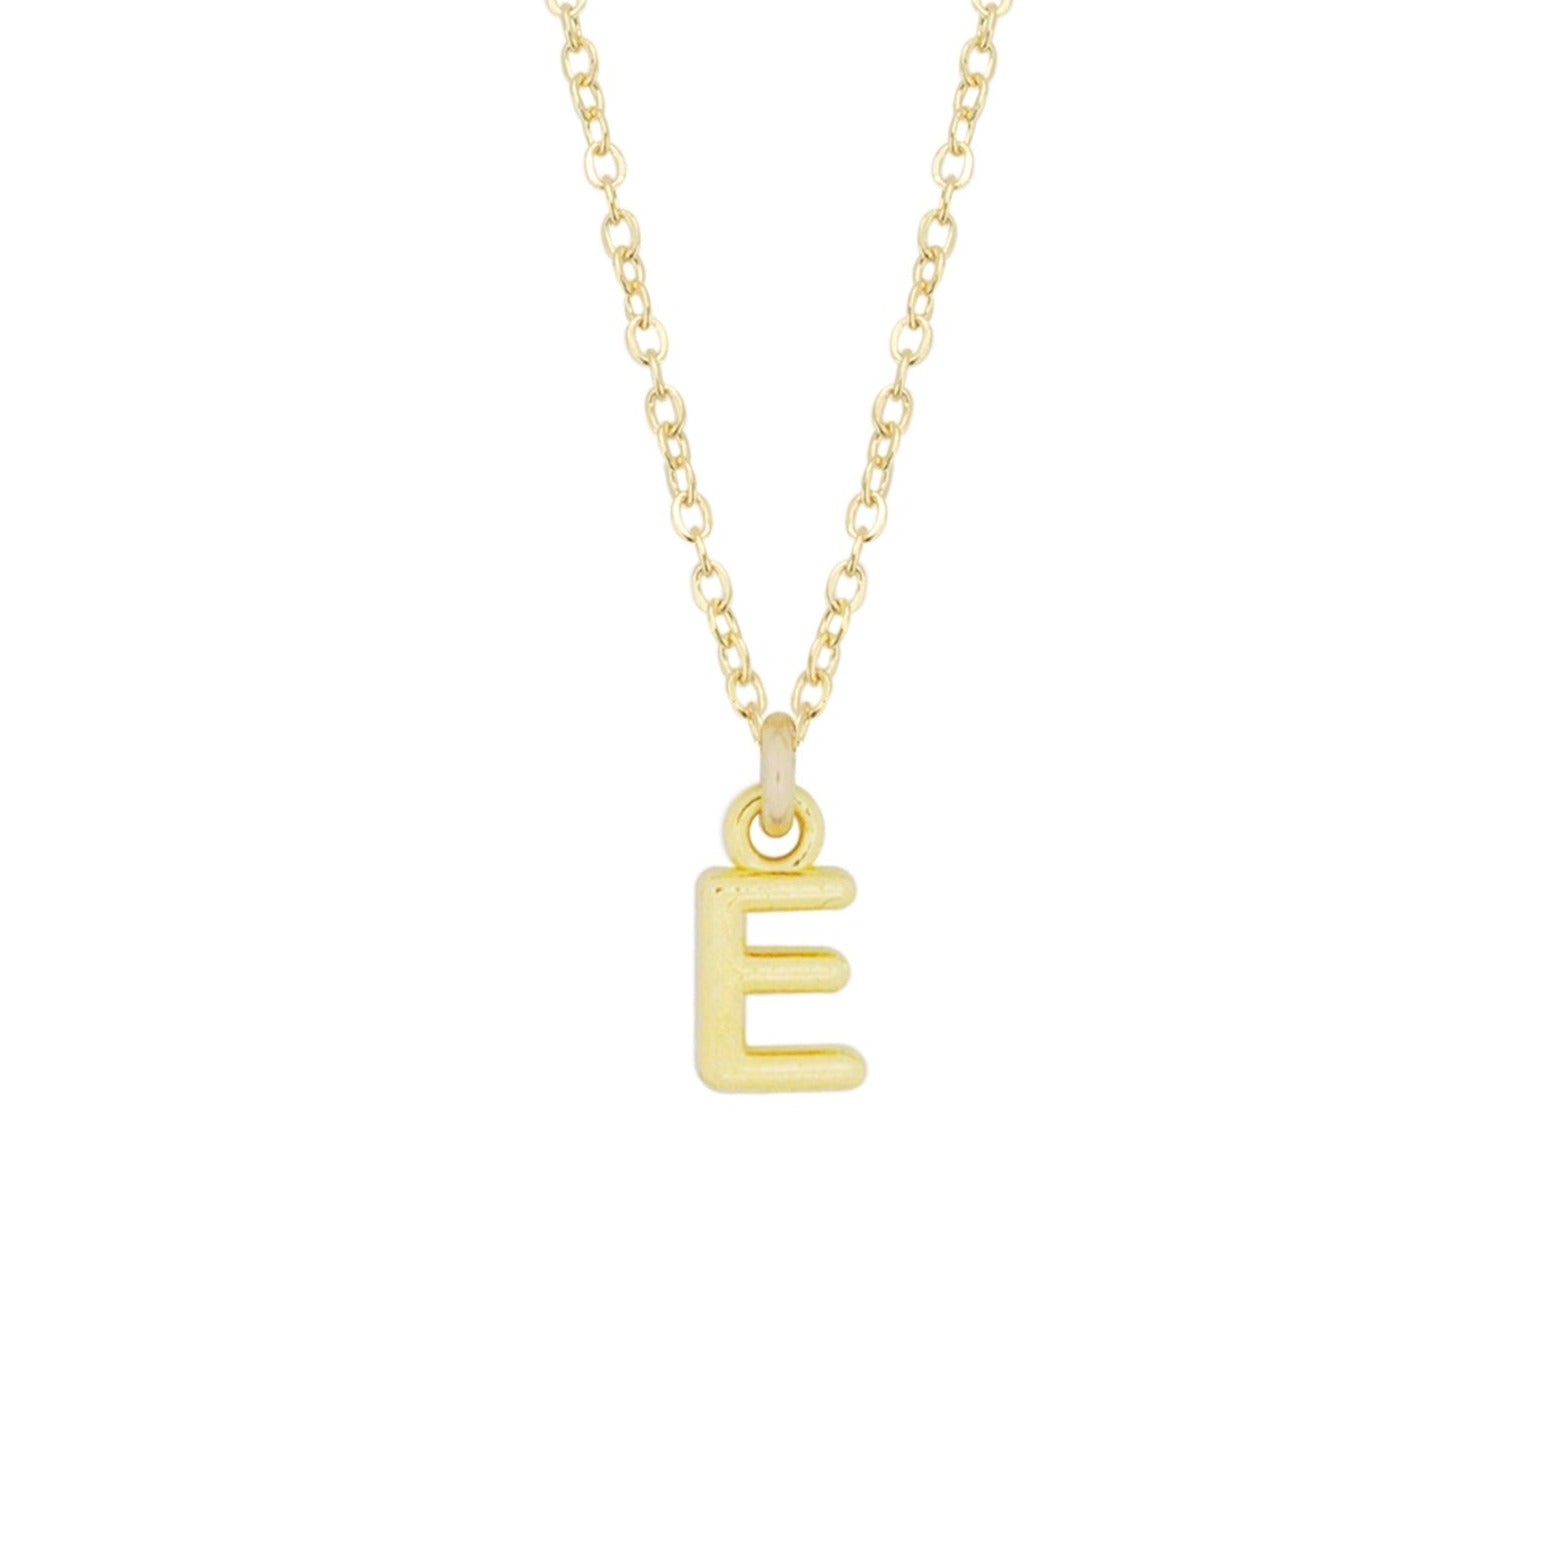 E Gold Initial Necklace by Katie Dean Jewelry, made in America, perfect for the dainty minimal jewelry lovers